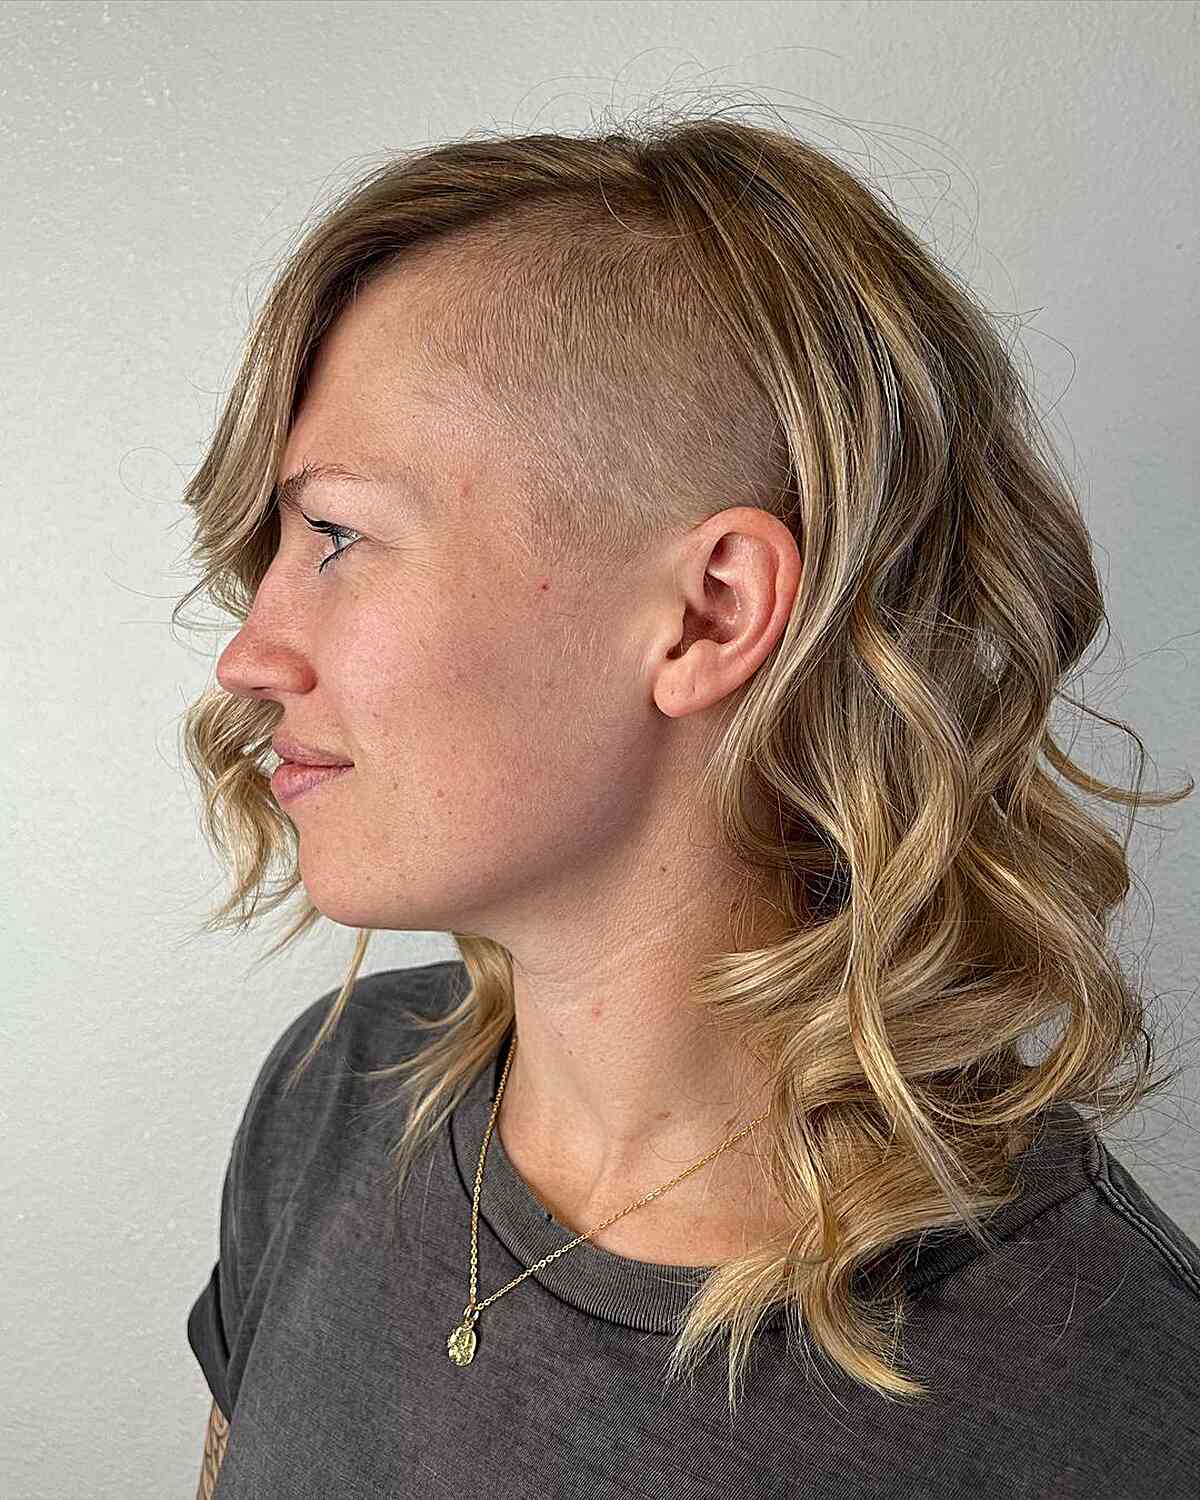 Edgy Undercut with Shaved Sides for Long Hair and women with tousled curls